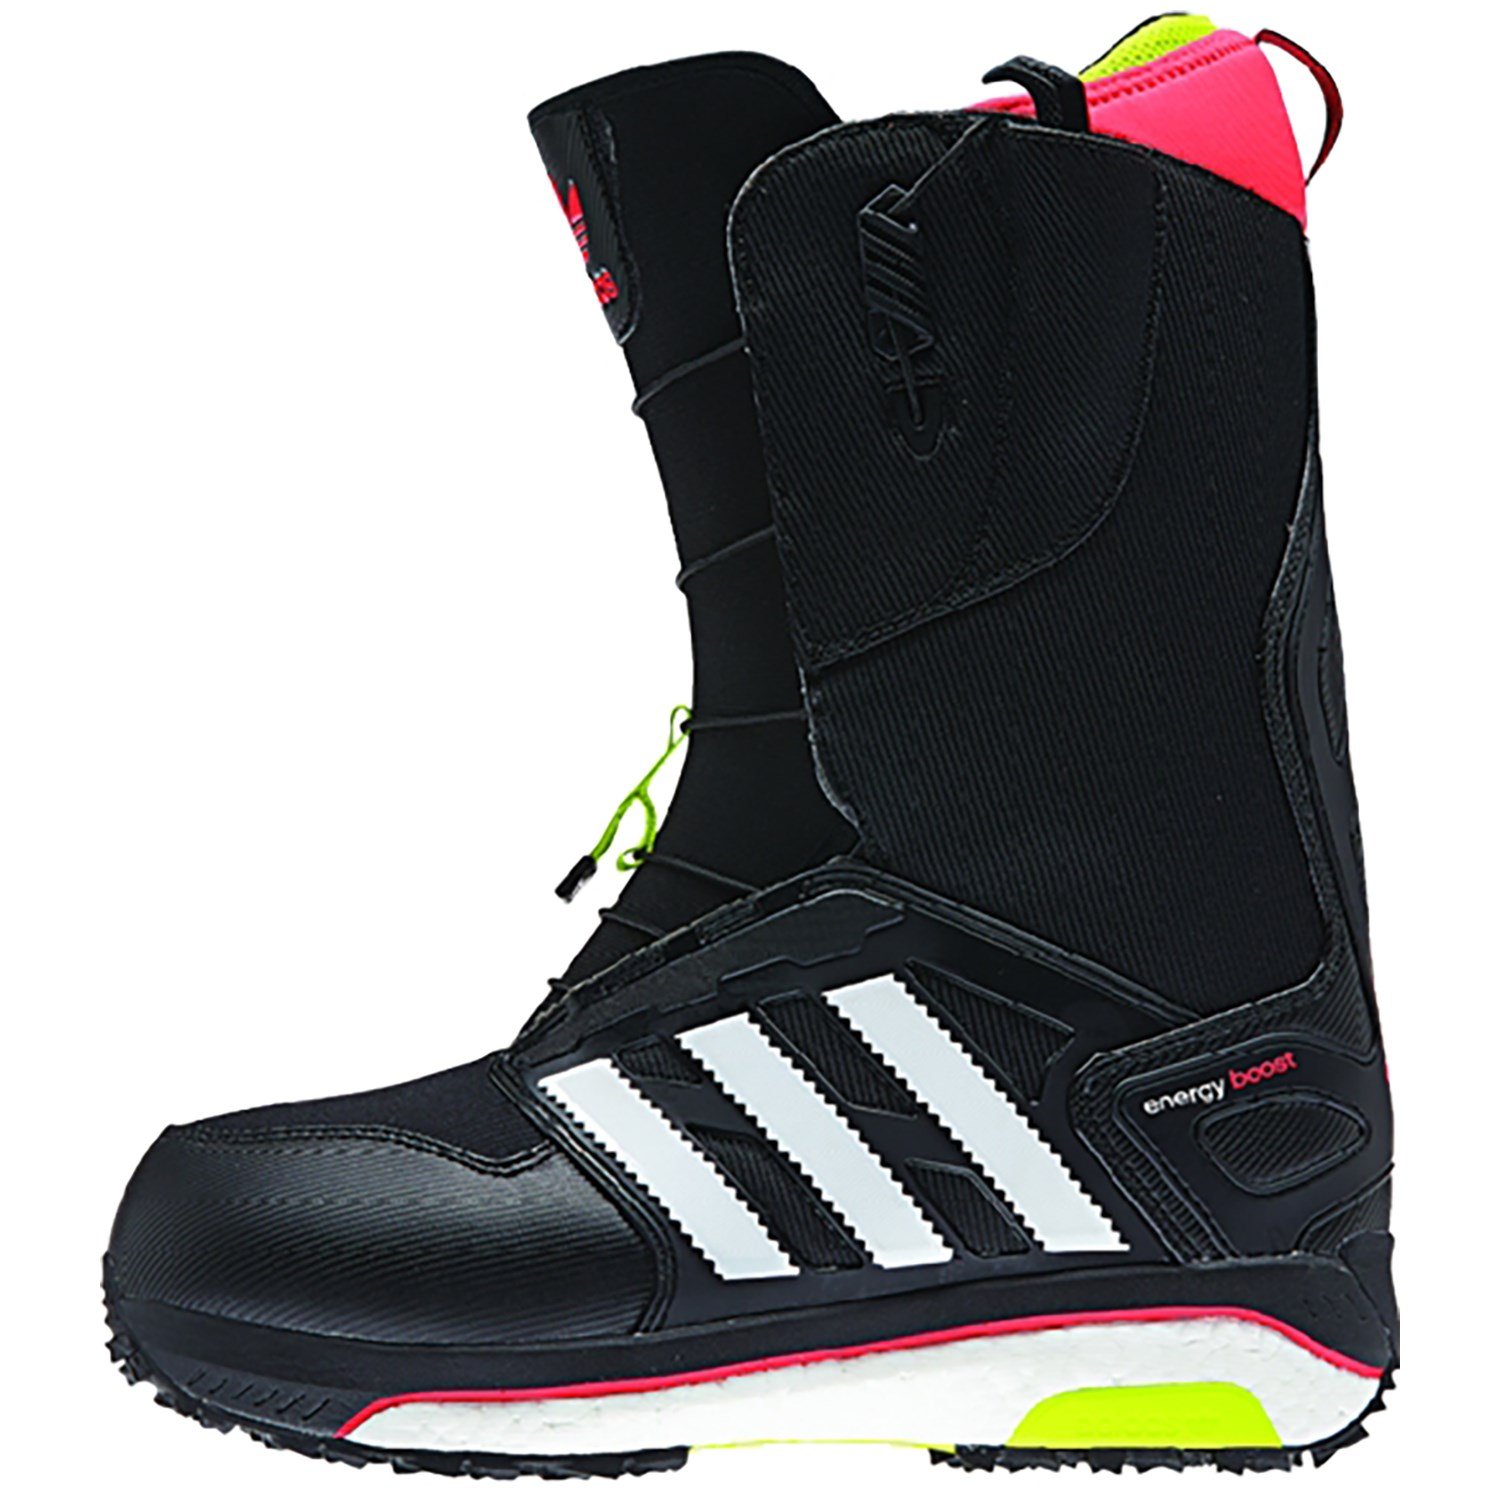 Adidas Energy Boost Snowboard Boots 